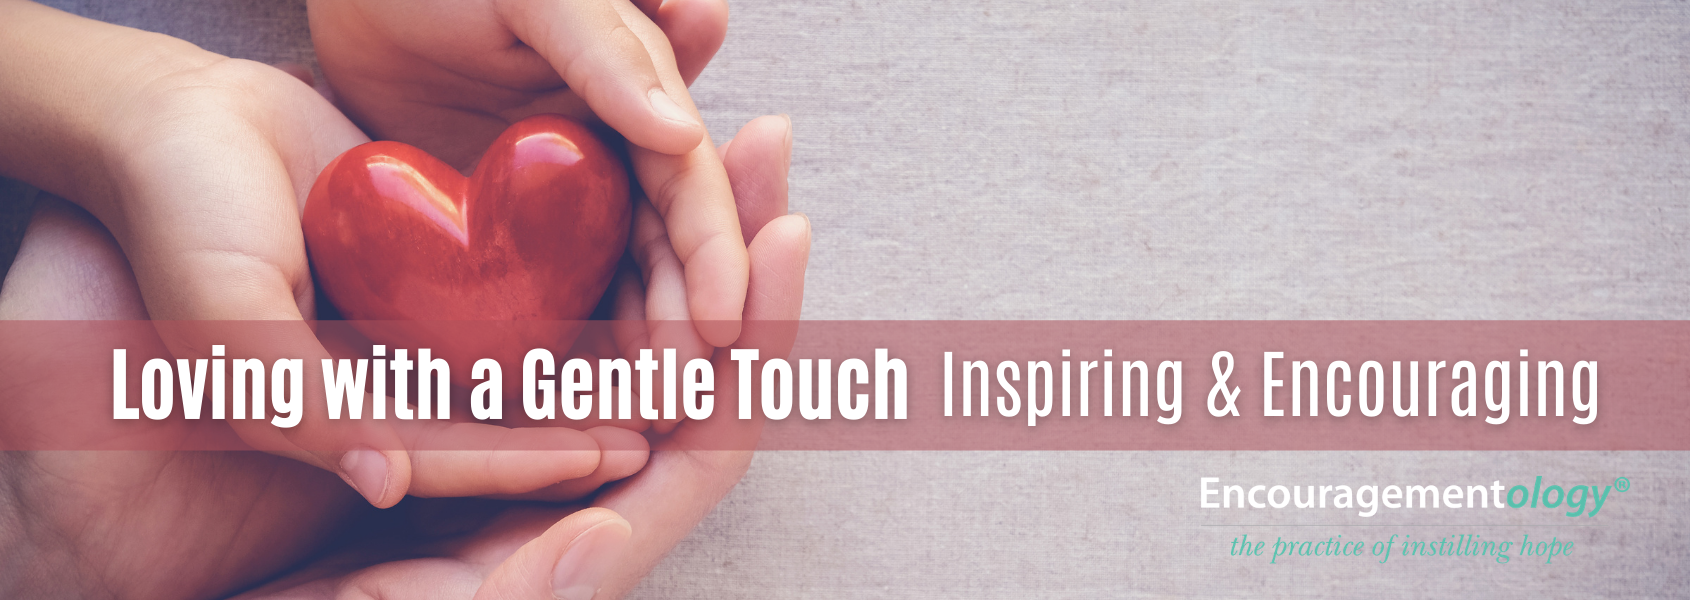 Loving with a gentle touch